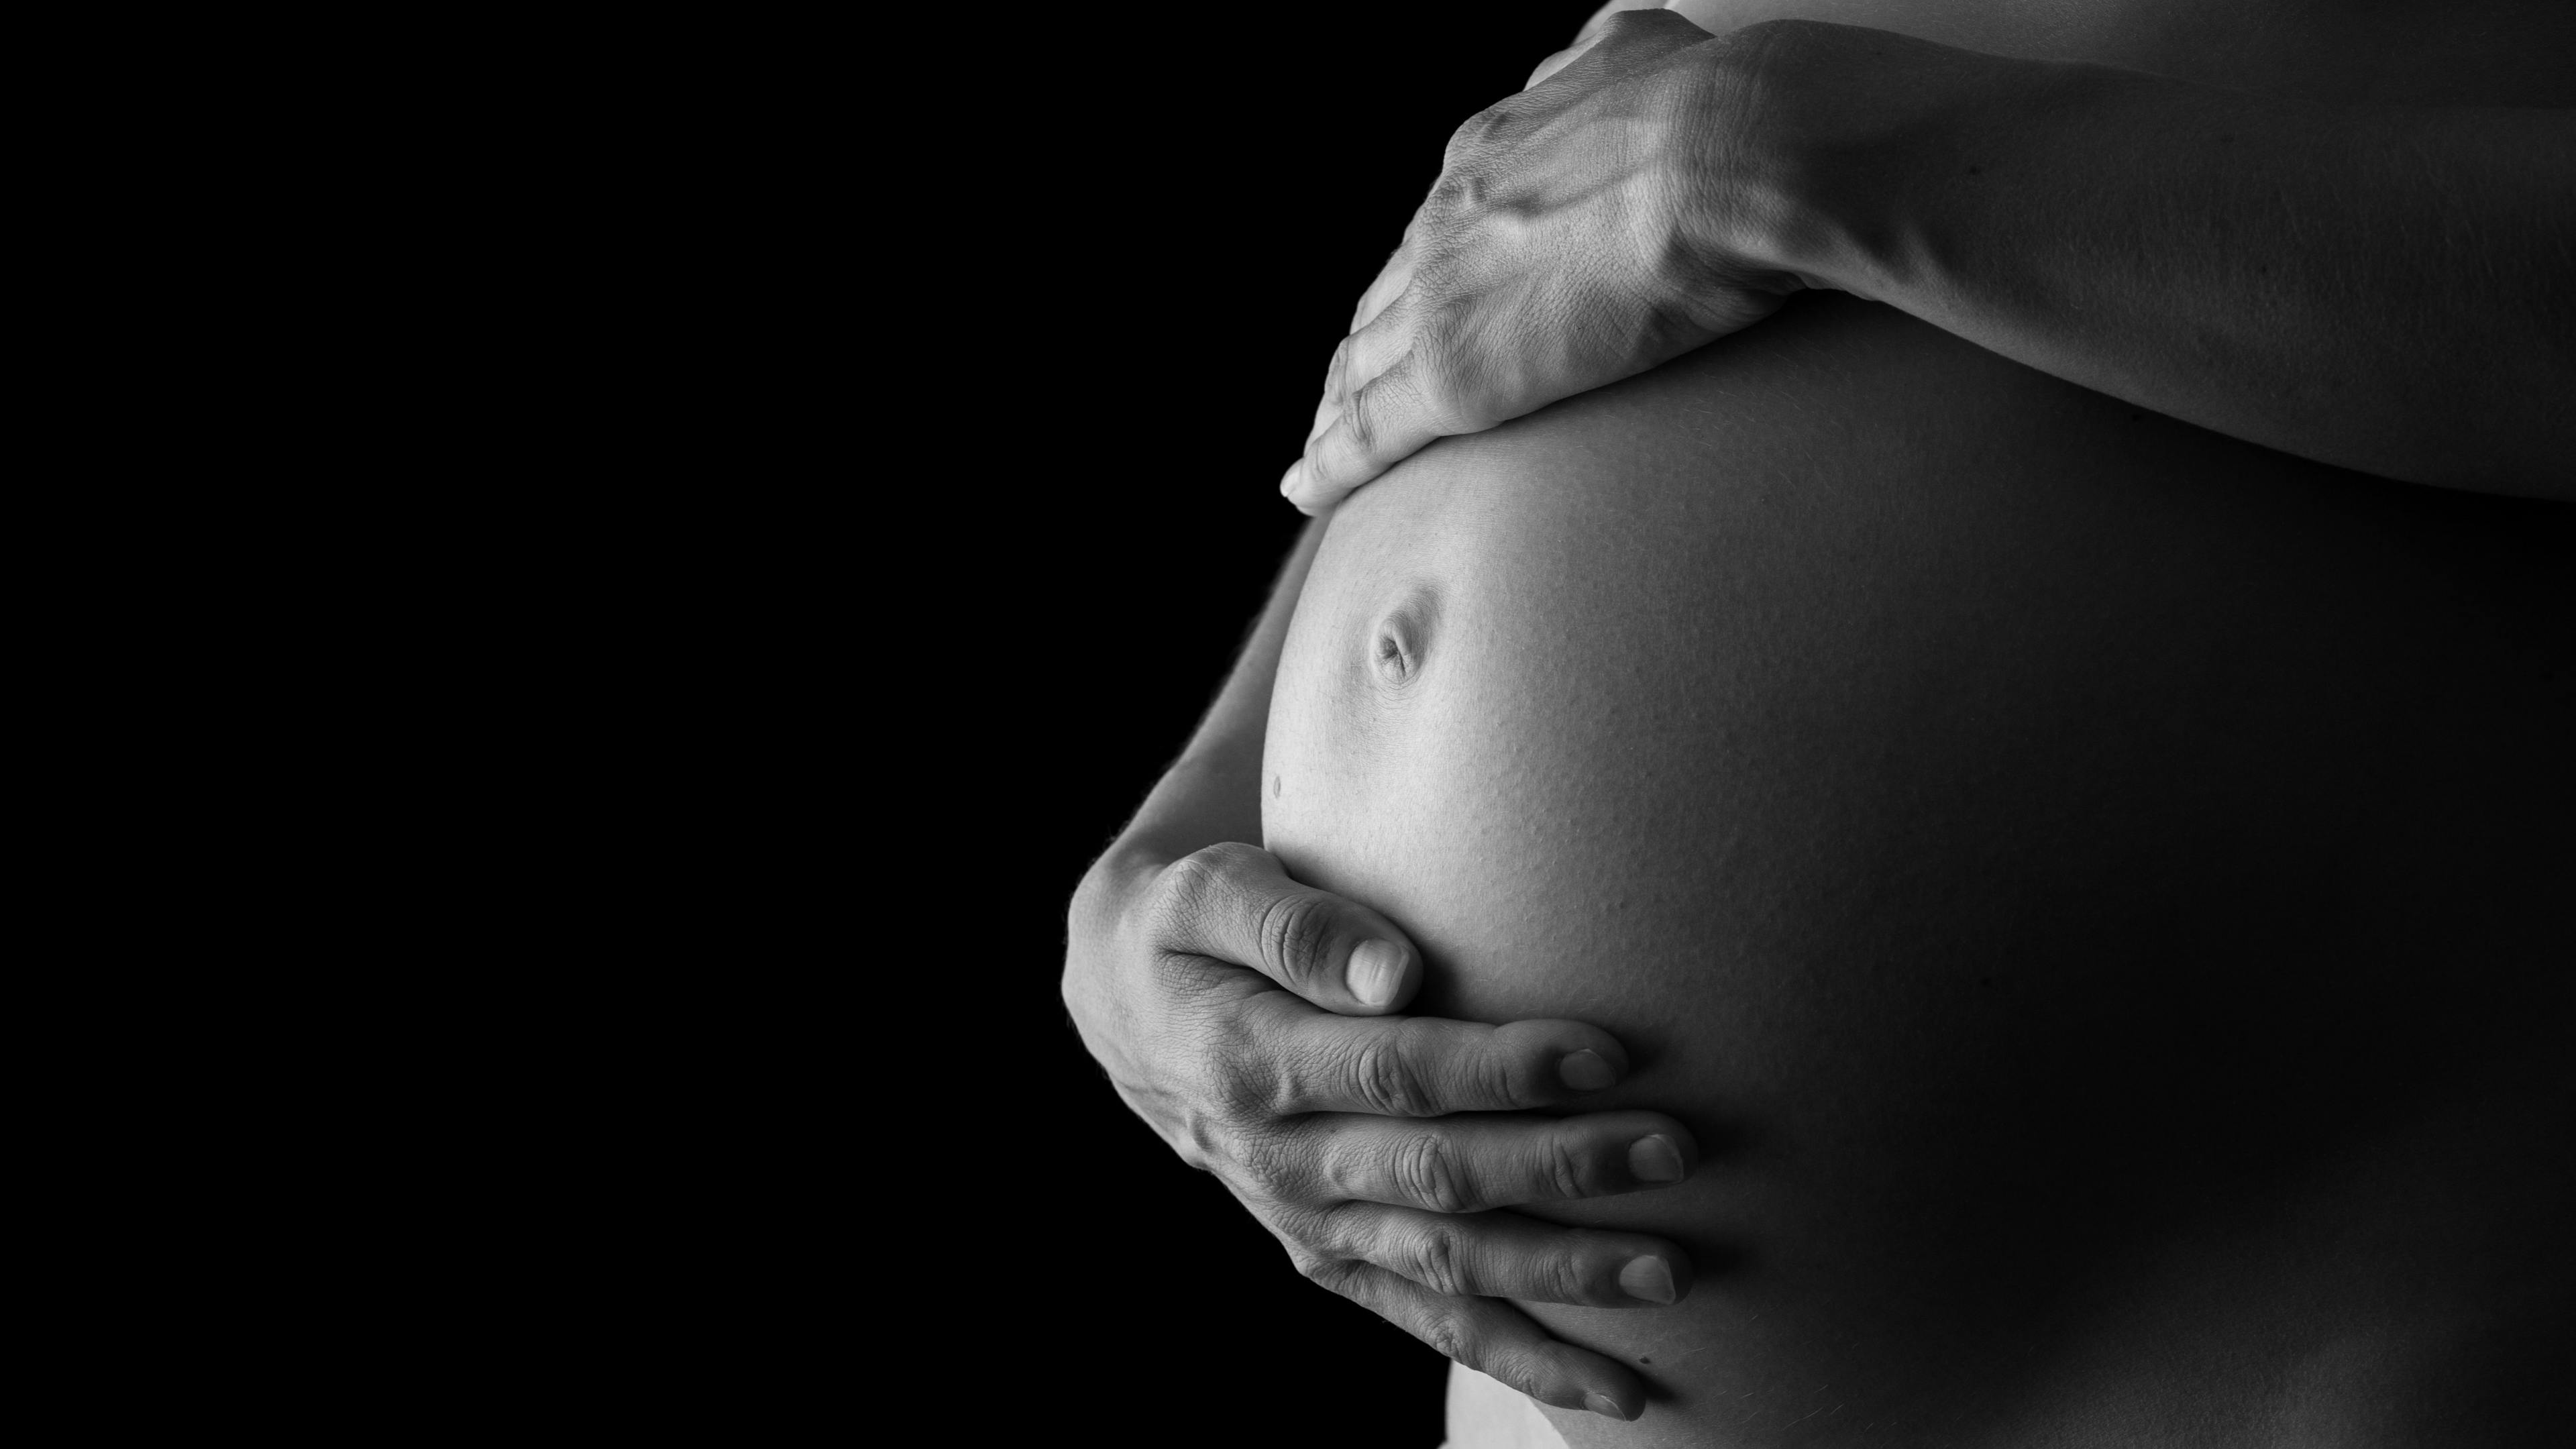 The maternal mortality rate nationwide more than doubled from 1999 to 2019, and some minority groups had higher increases, a new study shows. (Image credit: ©Gajus - stock.adobe.com)